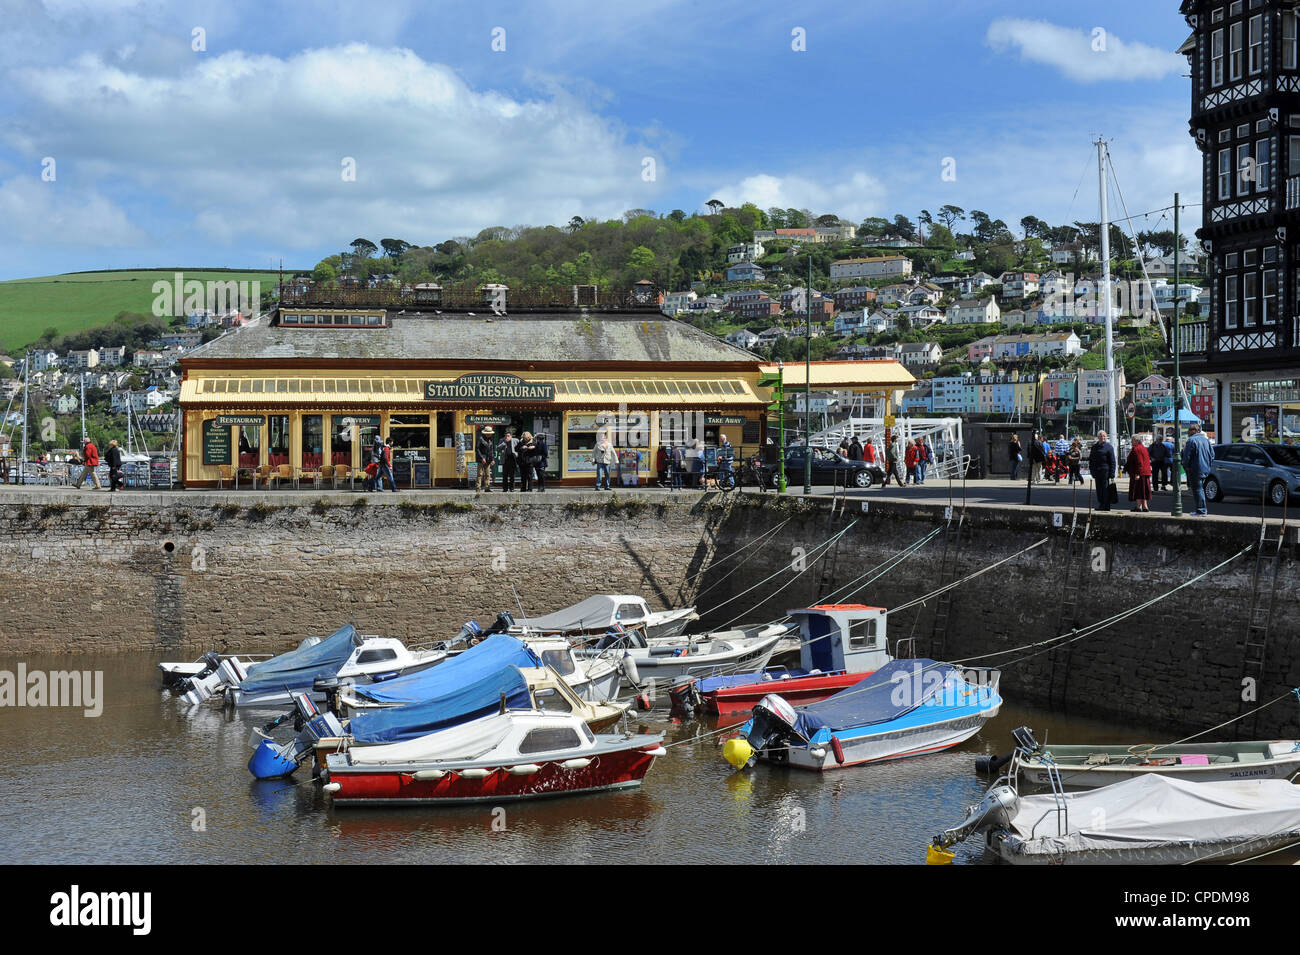 Dartmouth harbour and Station Restaurant Stock Photo